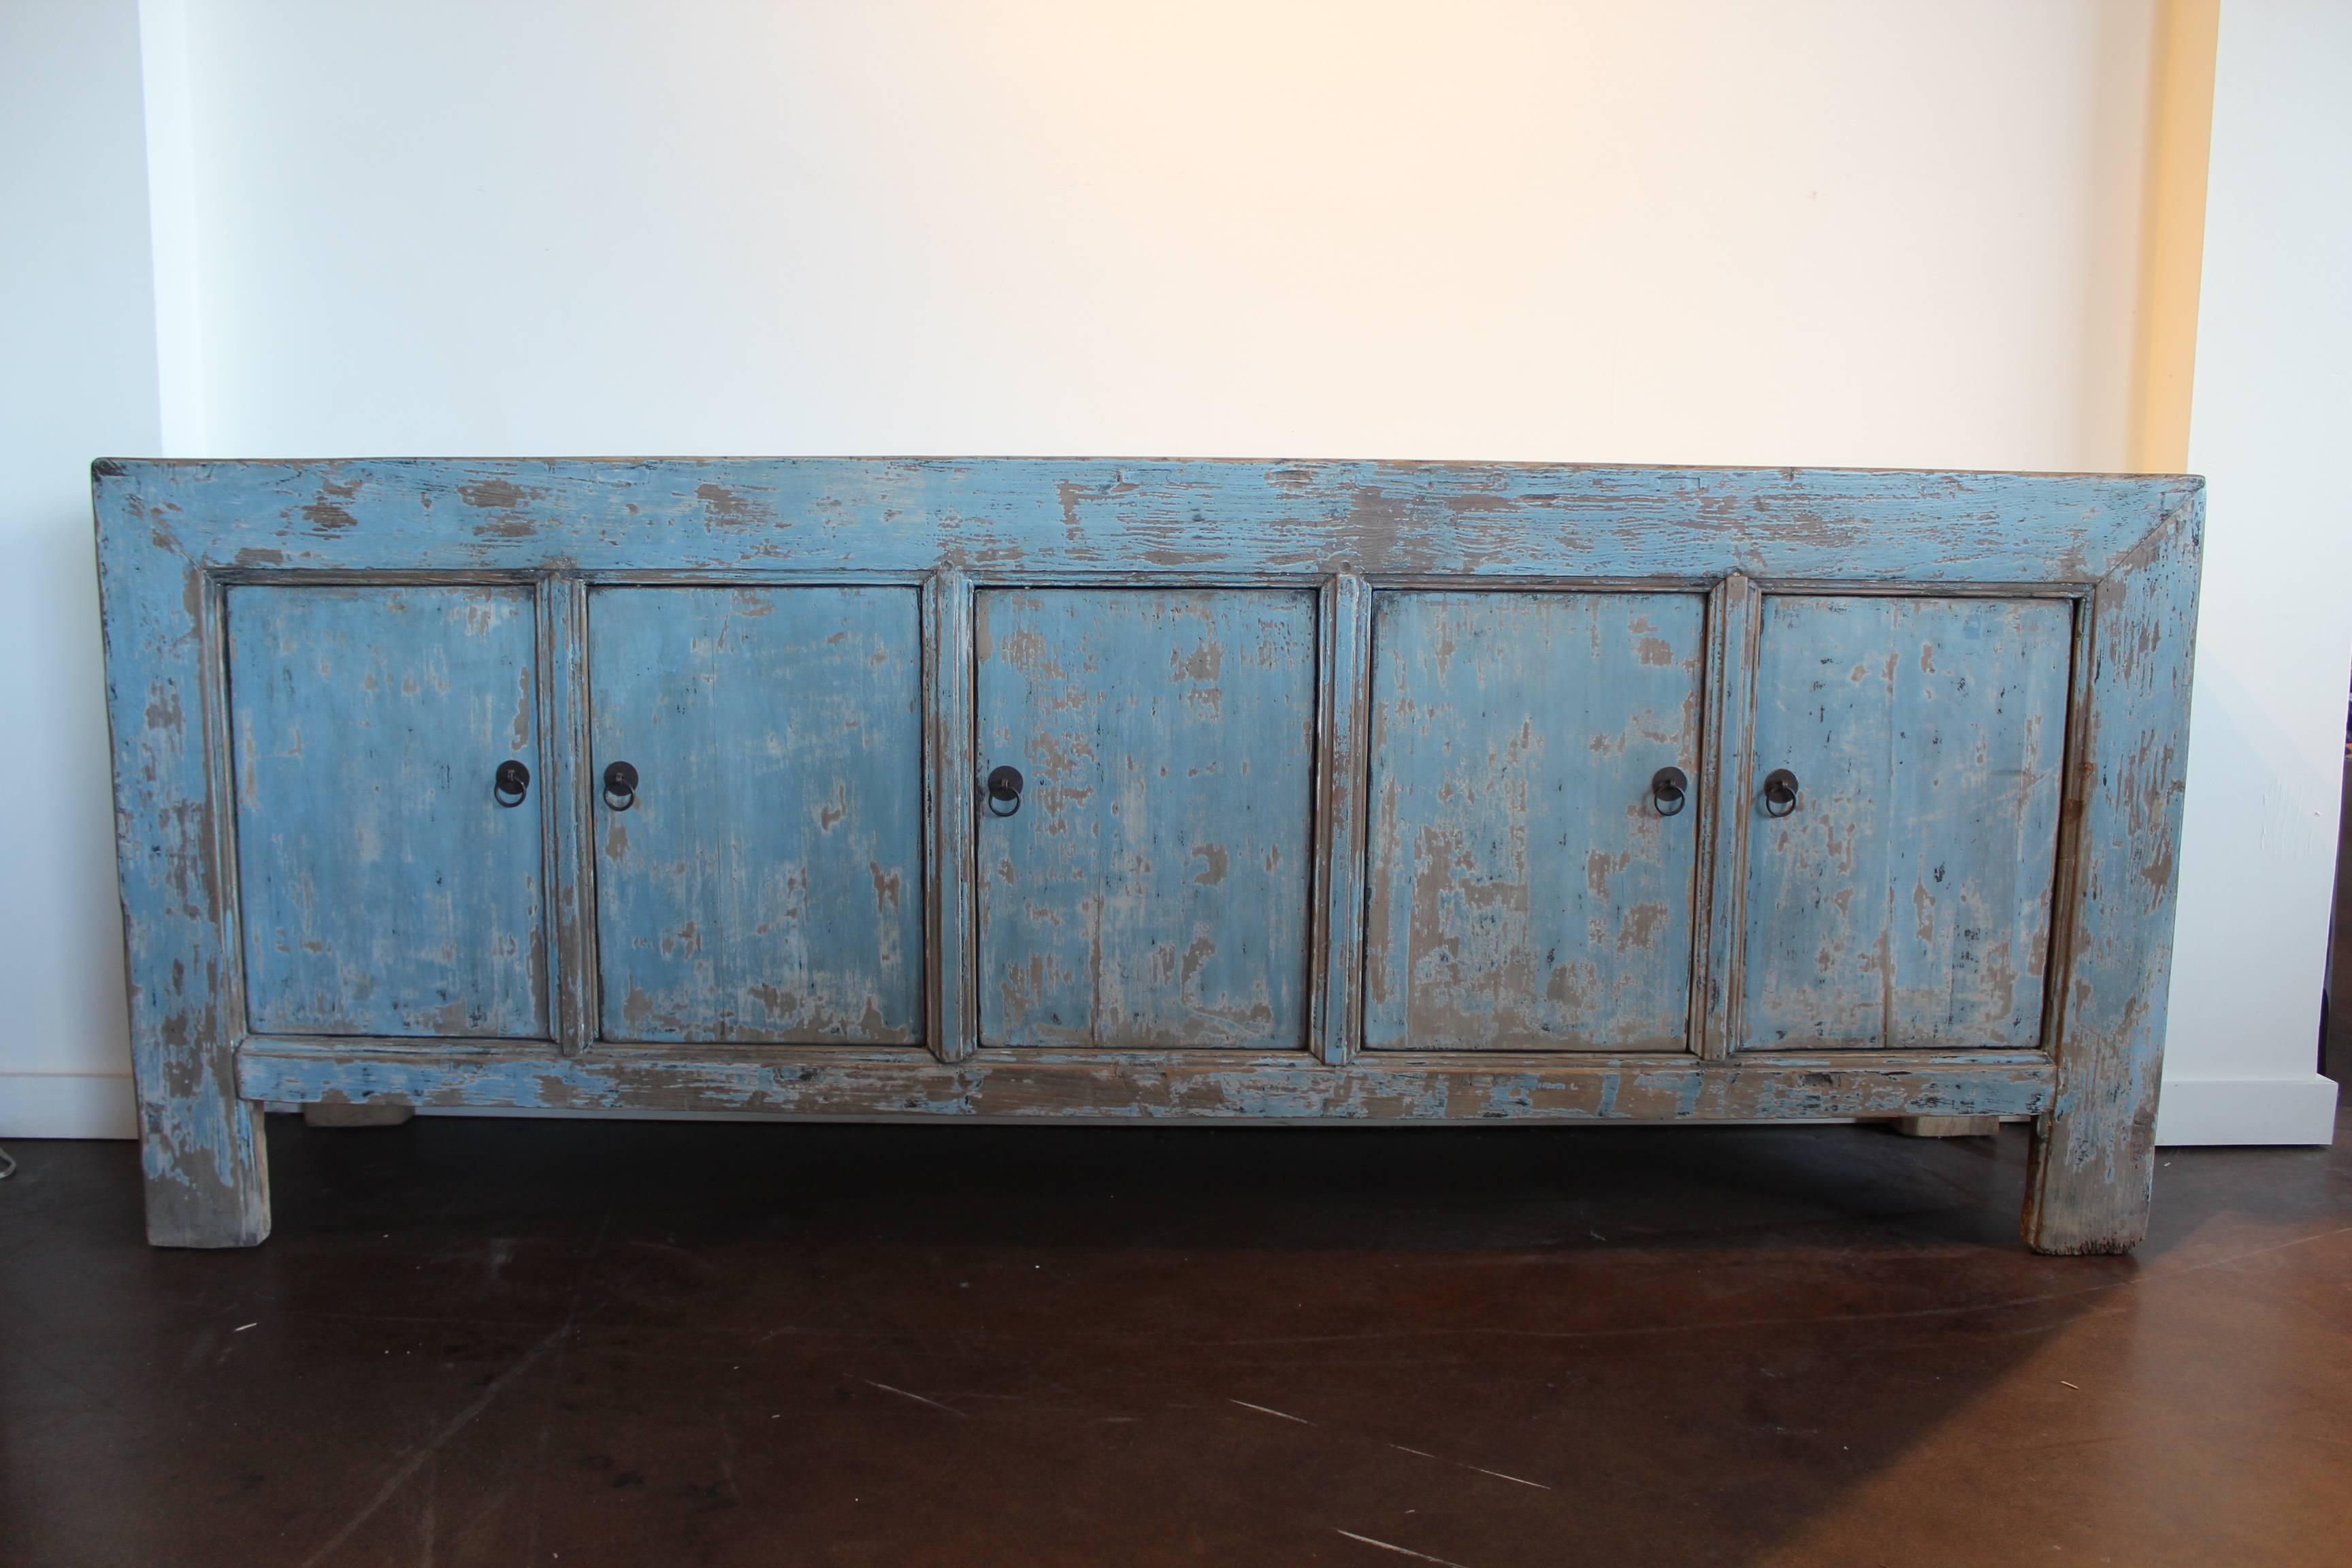 Natural distressed with Robin's egg blue coloration sideboard piece.
Five elm drawers with vintage bronze hardware.
Natural elm wood is exposed above the sideboard. 
 
Open spaced shelving with one long shelf inside. Easy to open and close